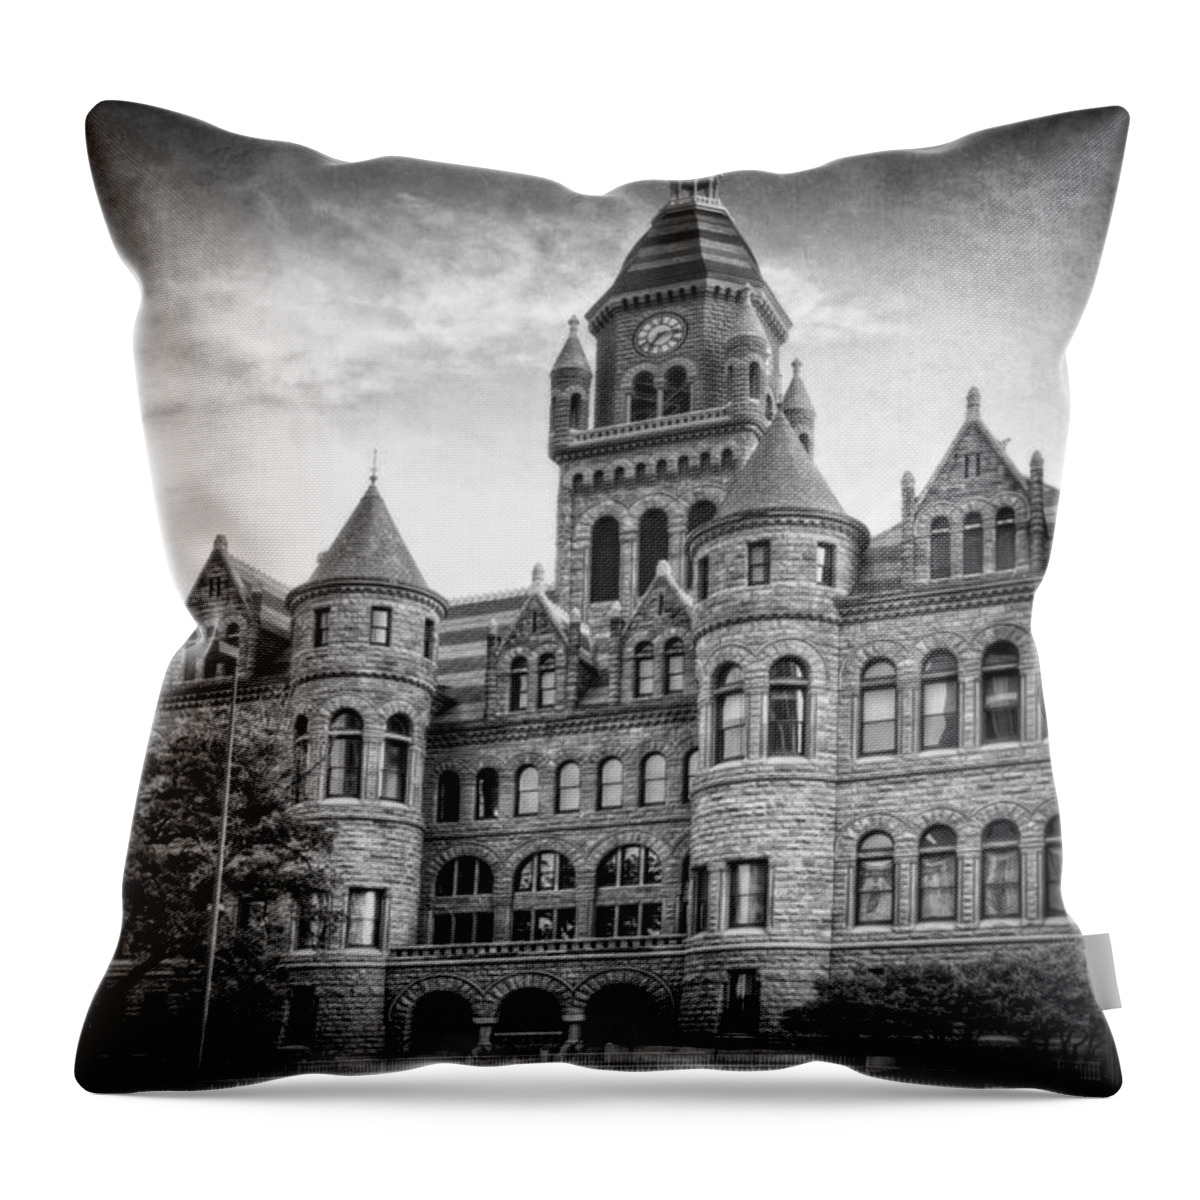 Courthouse Throw Pillow featuring the photograph Old Red Monochrome by Joan Carroll